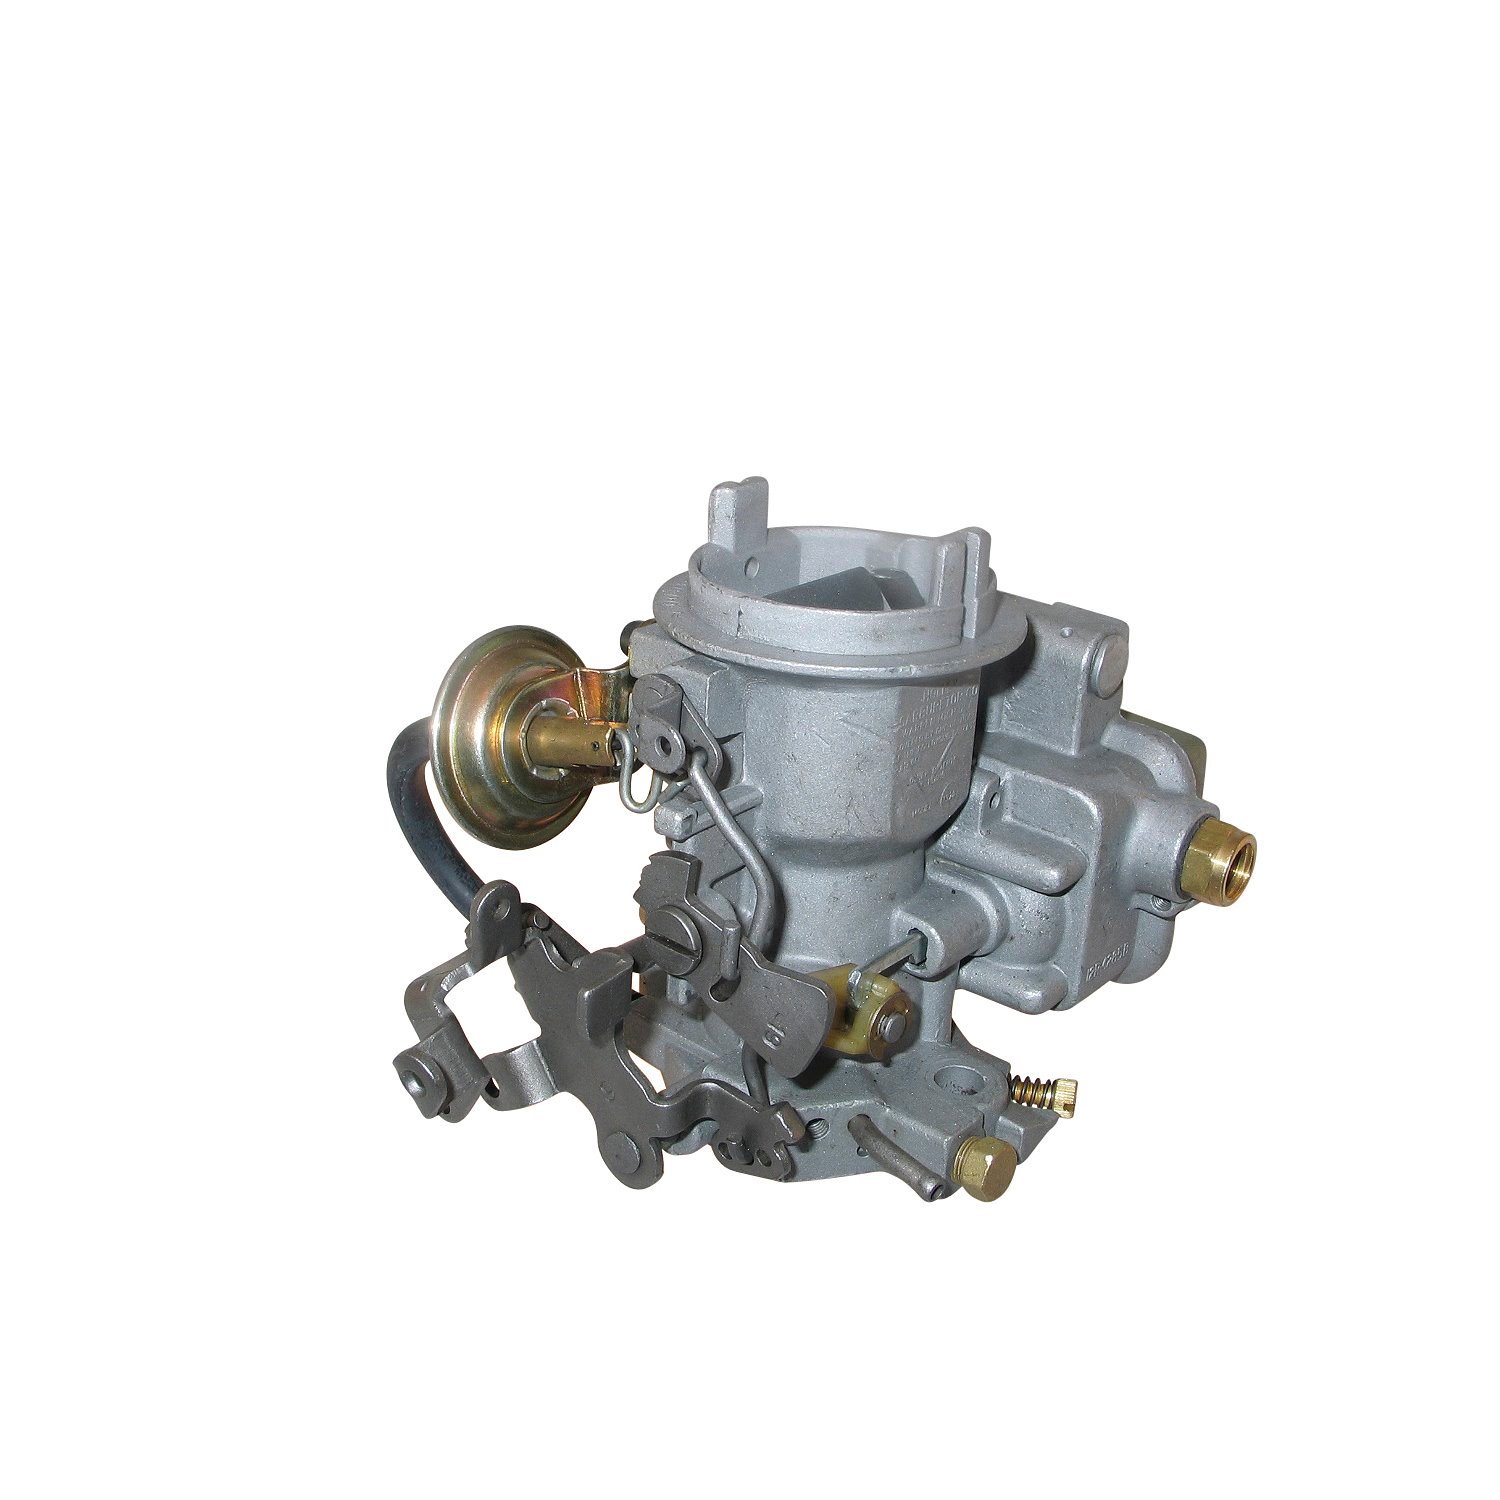 13-1379 Holley Remanufactured Carburetor, 1920-Style